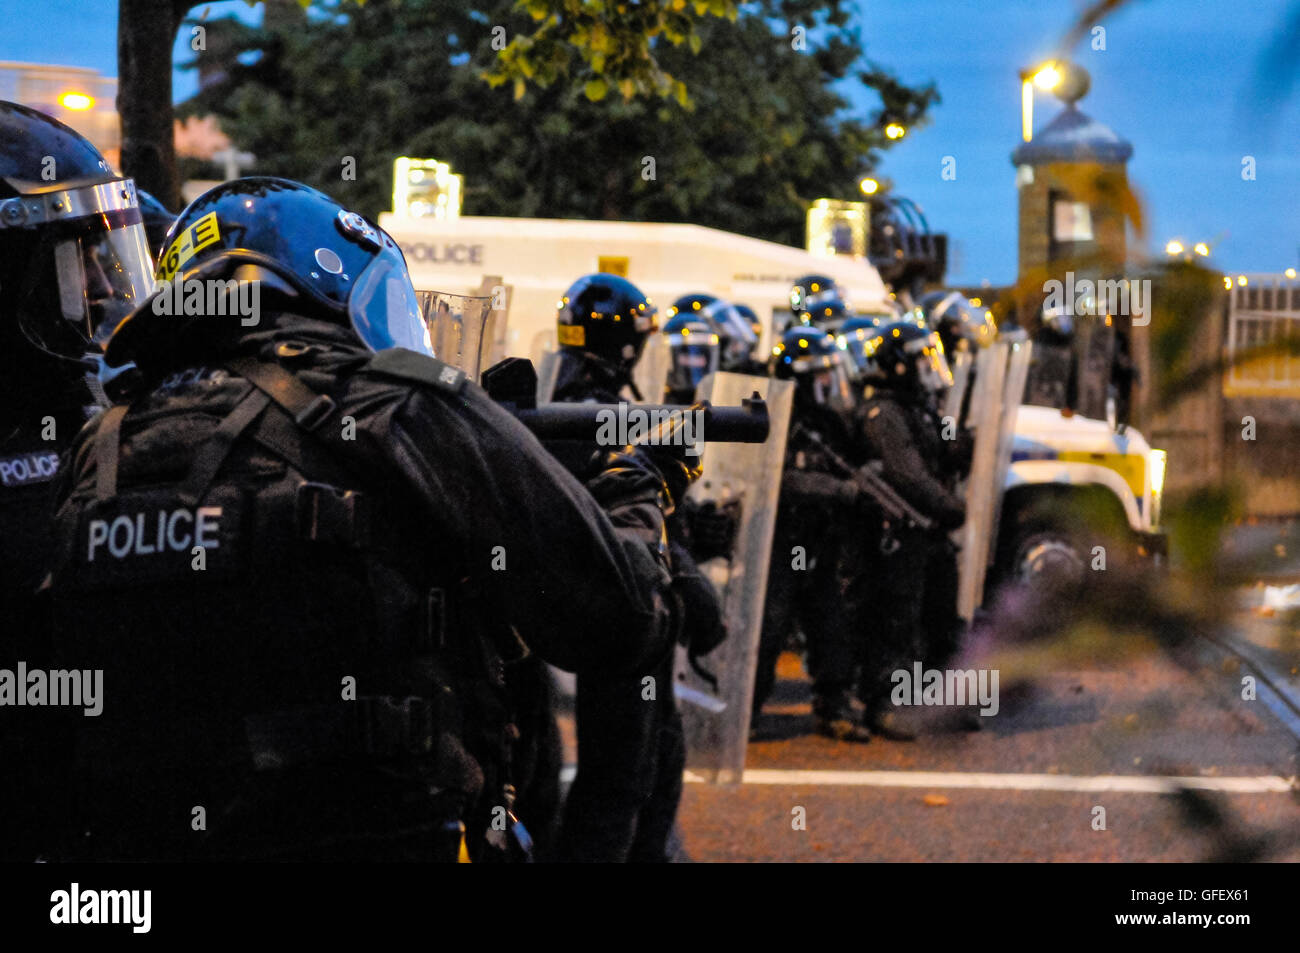 Belfast, Northern Ireland. 9th August 2013 - A PSNI Police officer aims a 'plastic bullet' gun at protesters during a loyalist riot. Stock Photo